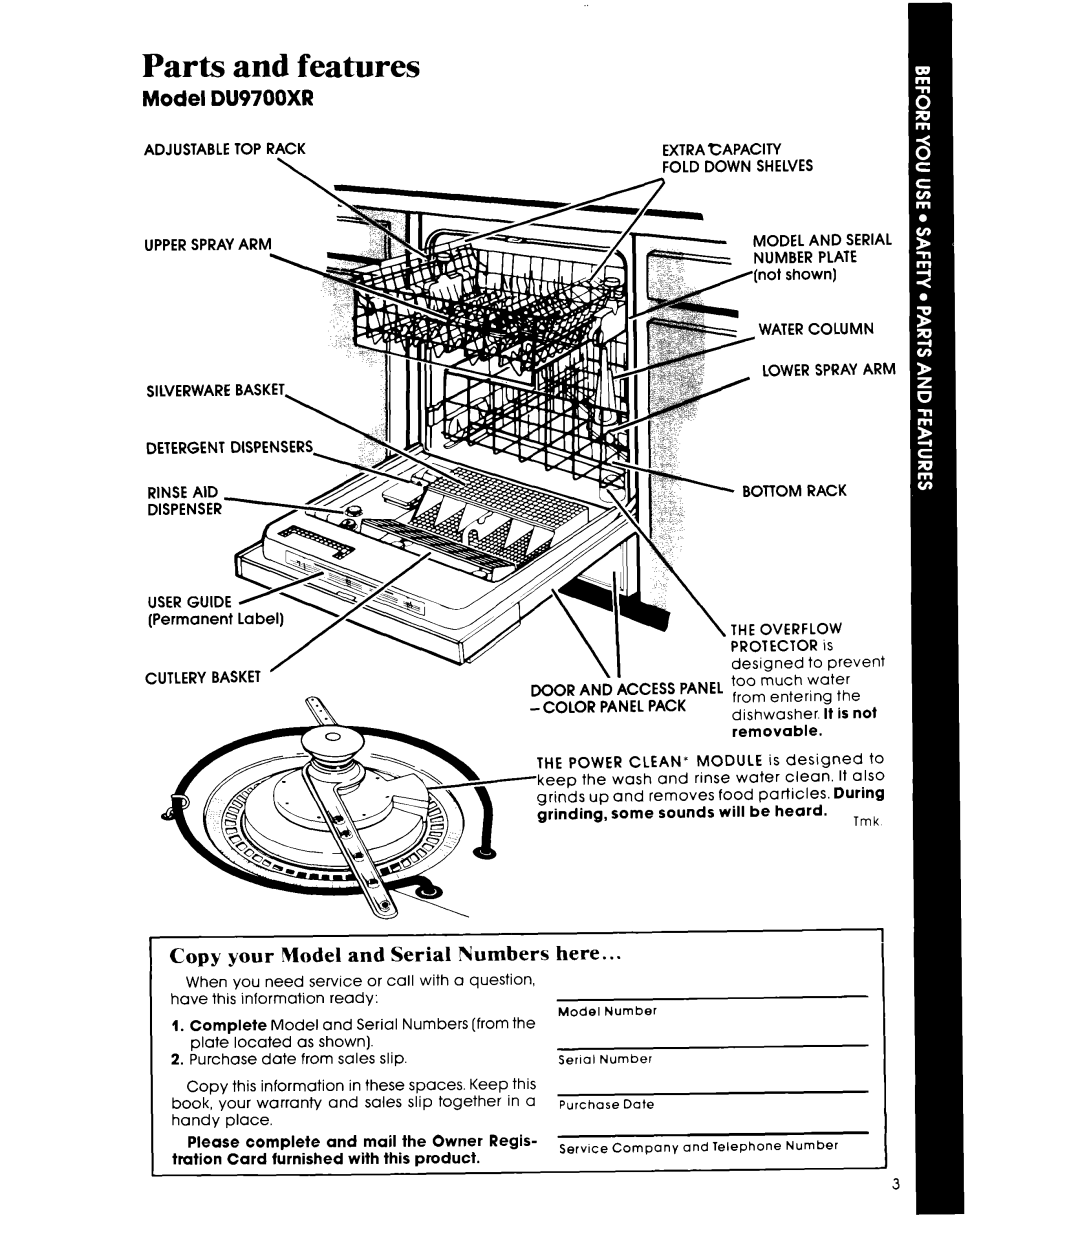 Whirlpool DU9700XR manual Parts, features, Copy your Model and Serial Numbers, here 